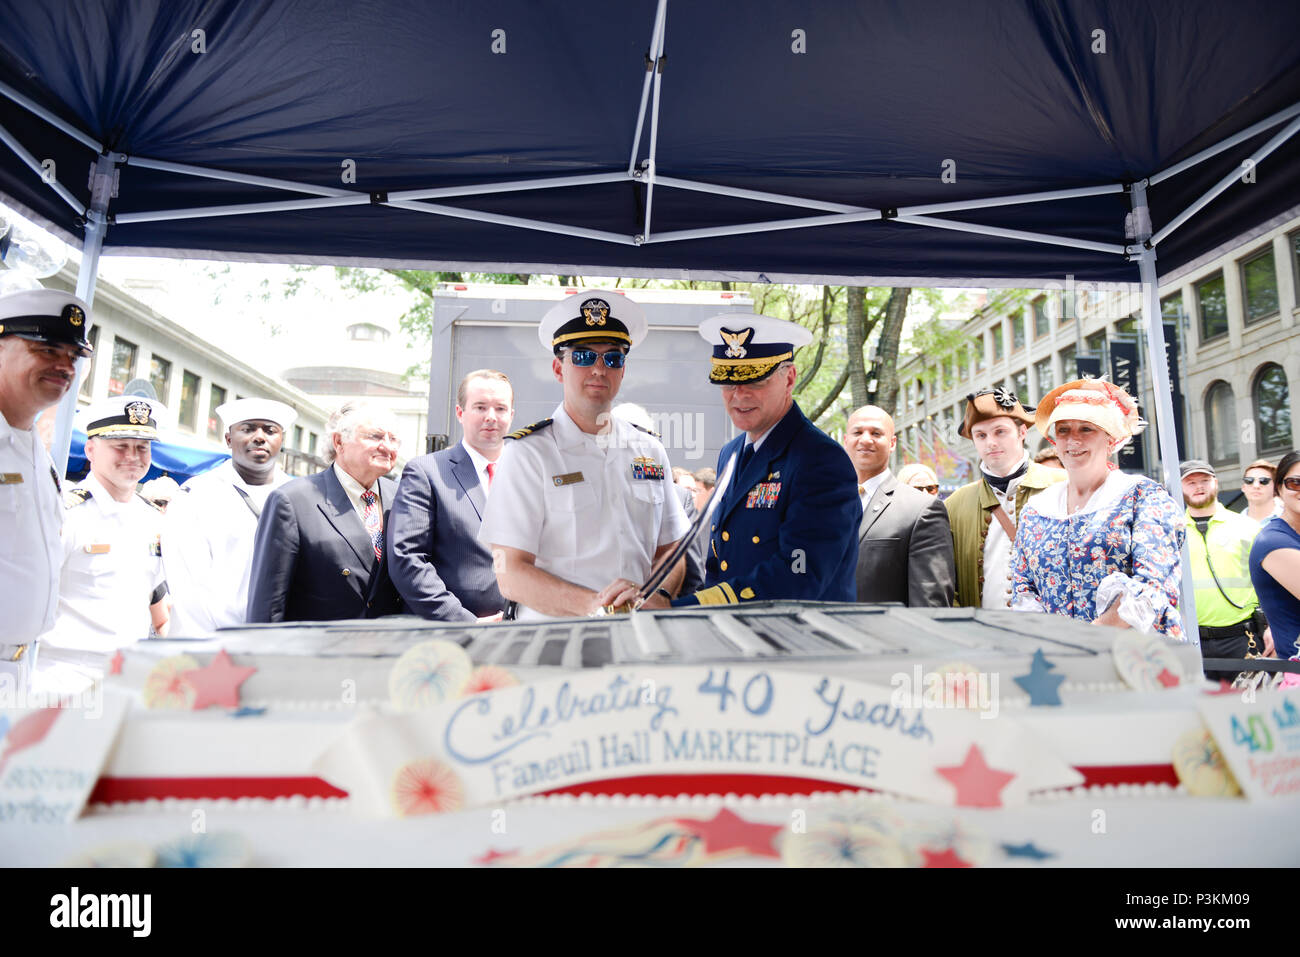 Coast Guard Rear Adm. Steven Poulin, commander First Coast Guard District (Center right,) cuts a cake with Navy Lt. Cmdr. Tim Anderson, executive officer of the U.S.S. Constitution, at the 2016 Boston Harborfest opening ceremony. The two were joined by Boston officials, military members, and scores of local citizens to kick off the four-day celebration that honor the area’s deep ties to American history. (U.S. Coast Guard photo by Chief Petty Officer Luke Pinneo) Stock Photo